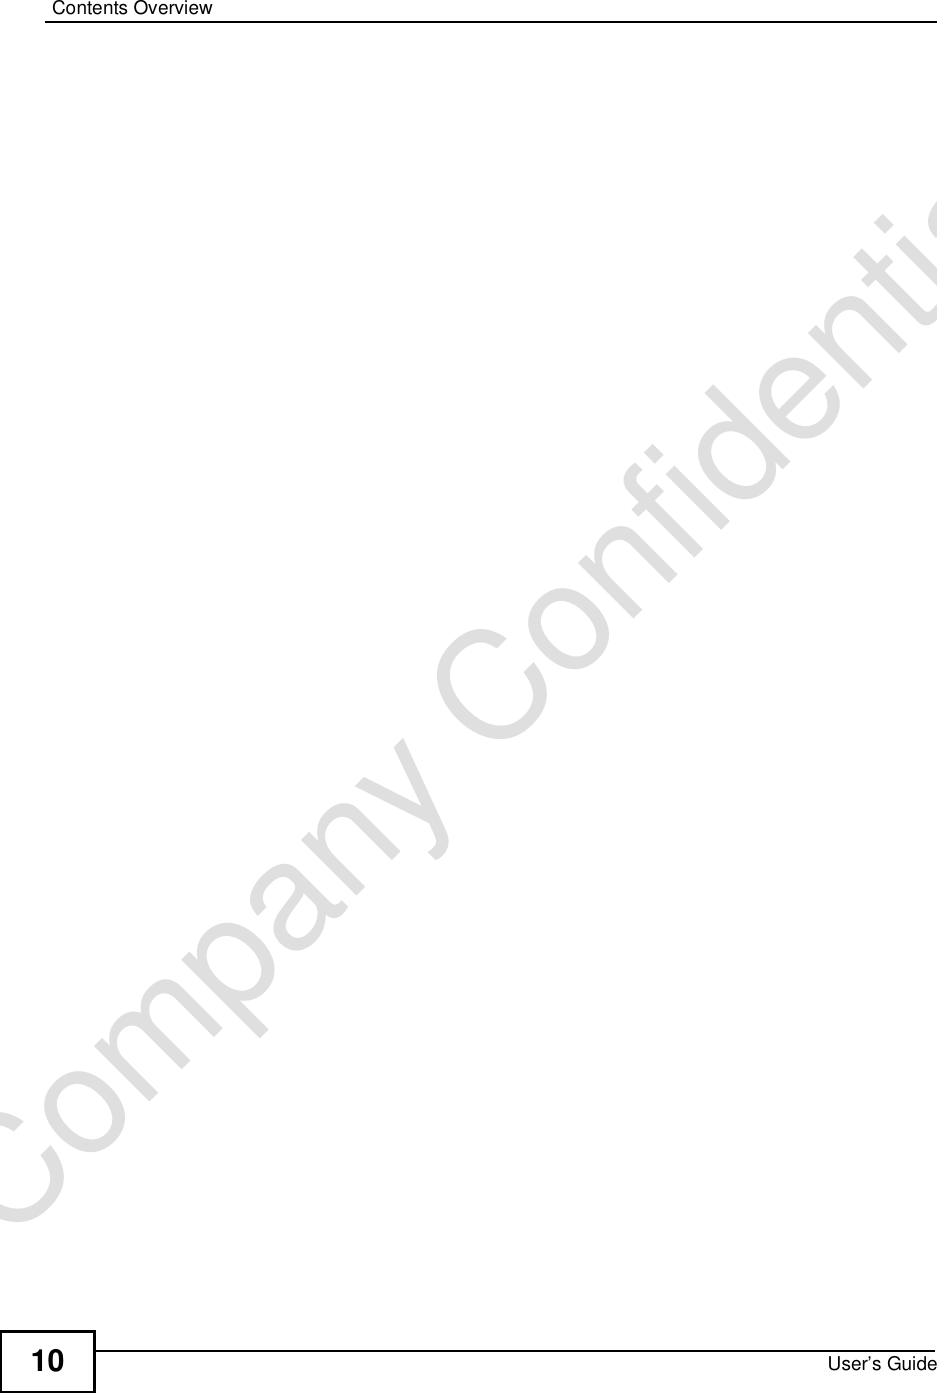 Contents OverviewUser’s Guide10Company Confidential